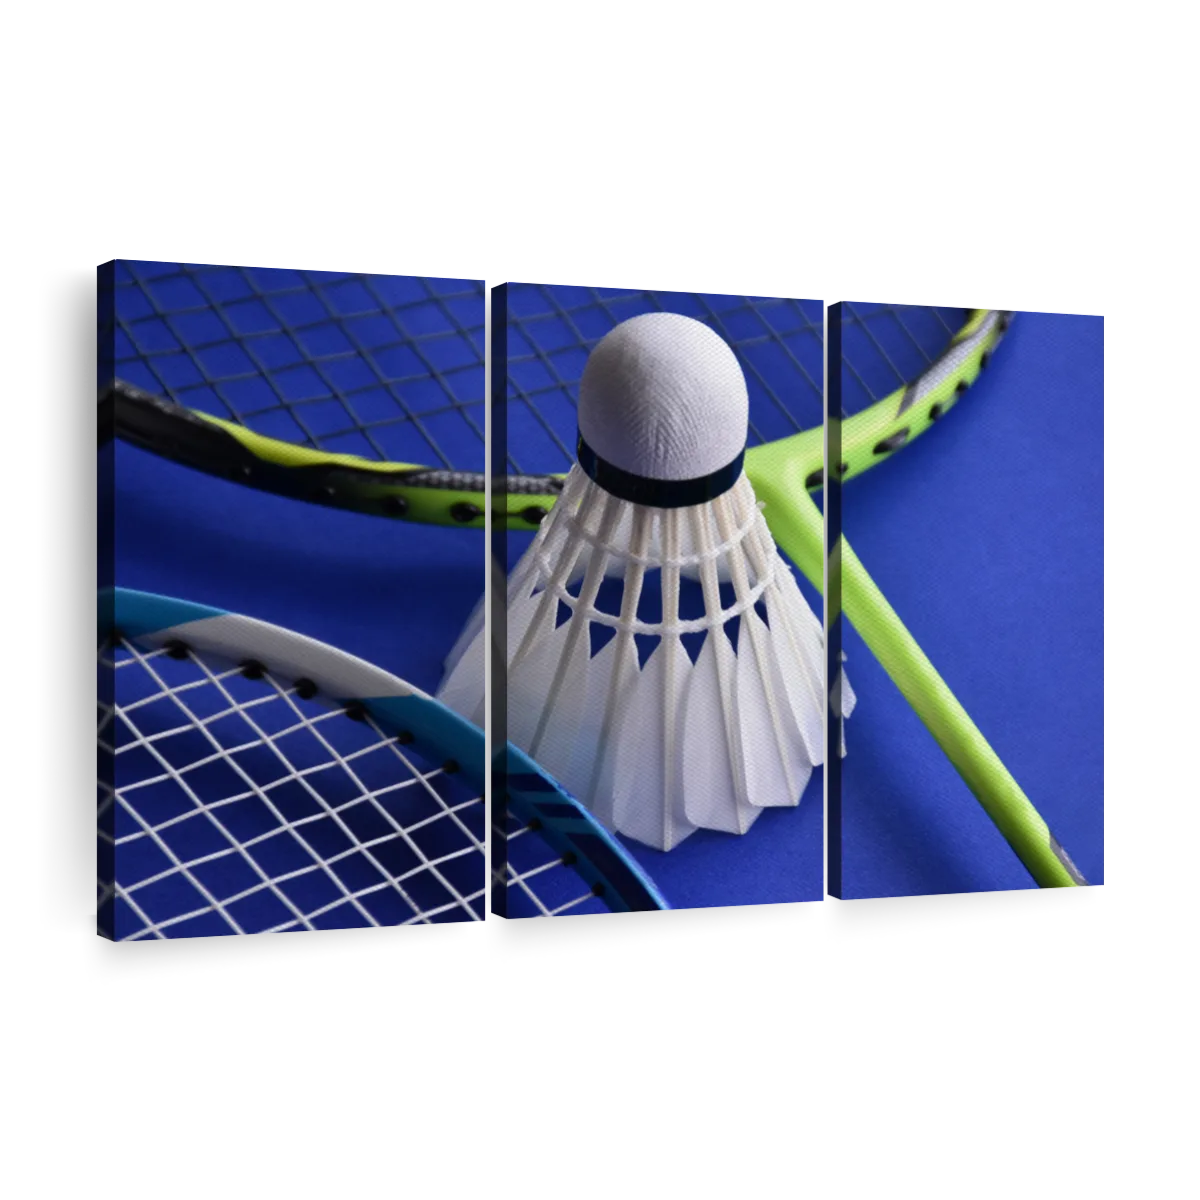 Badminton Rackets And Shuttlecock Art Canvas Prints, Frames and Posters